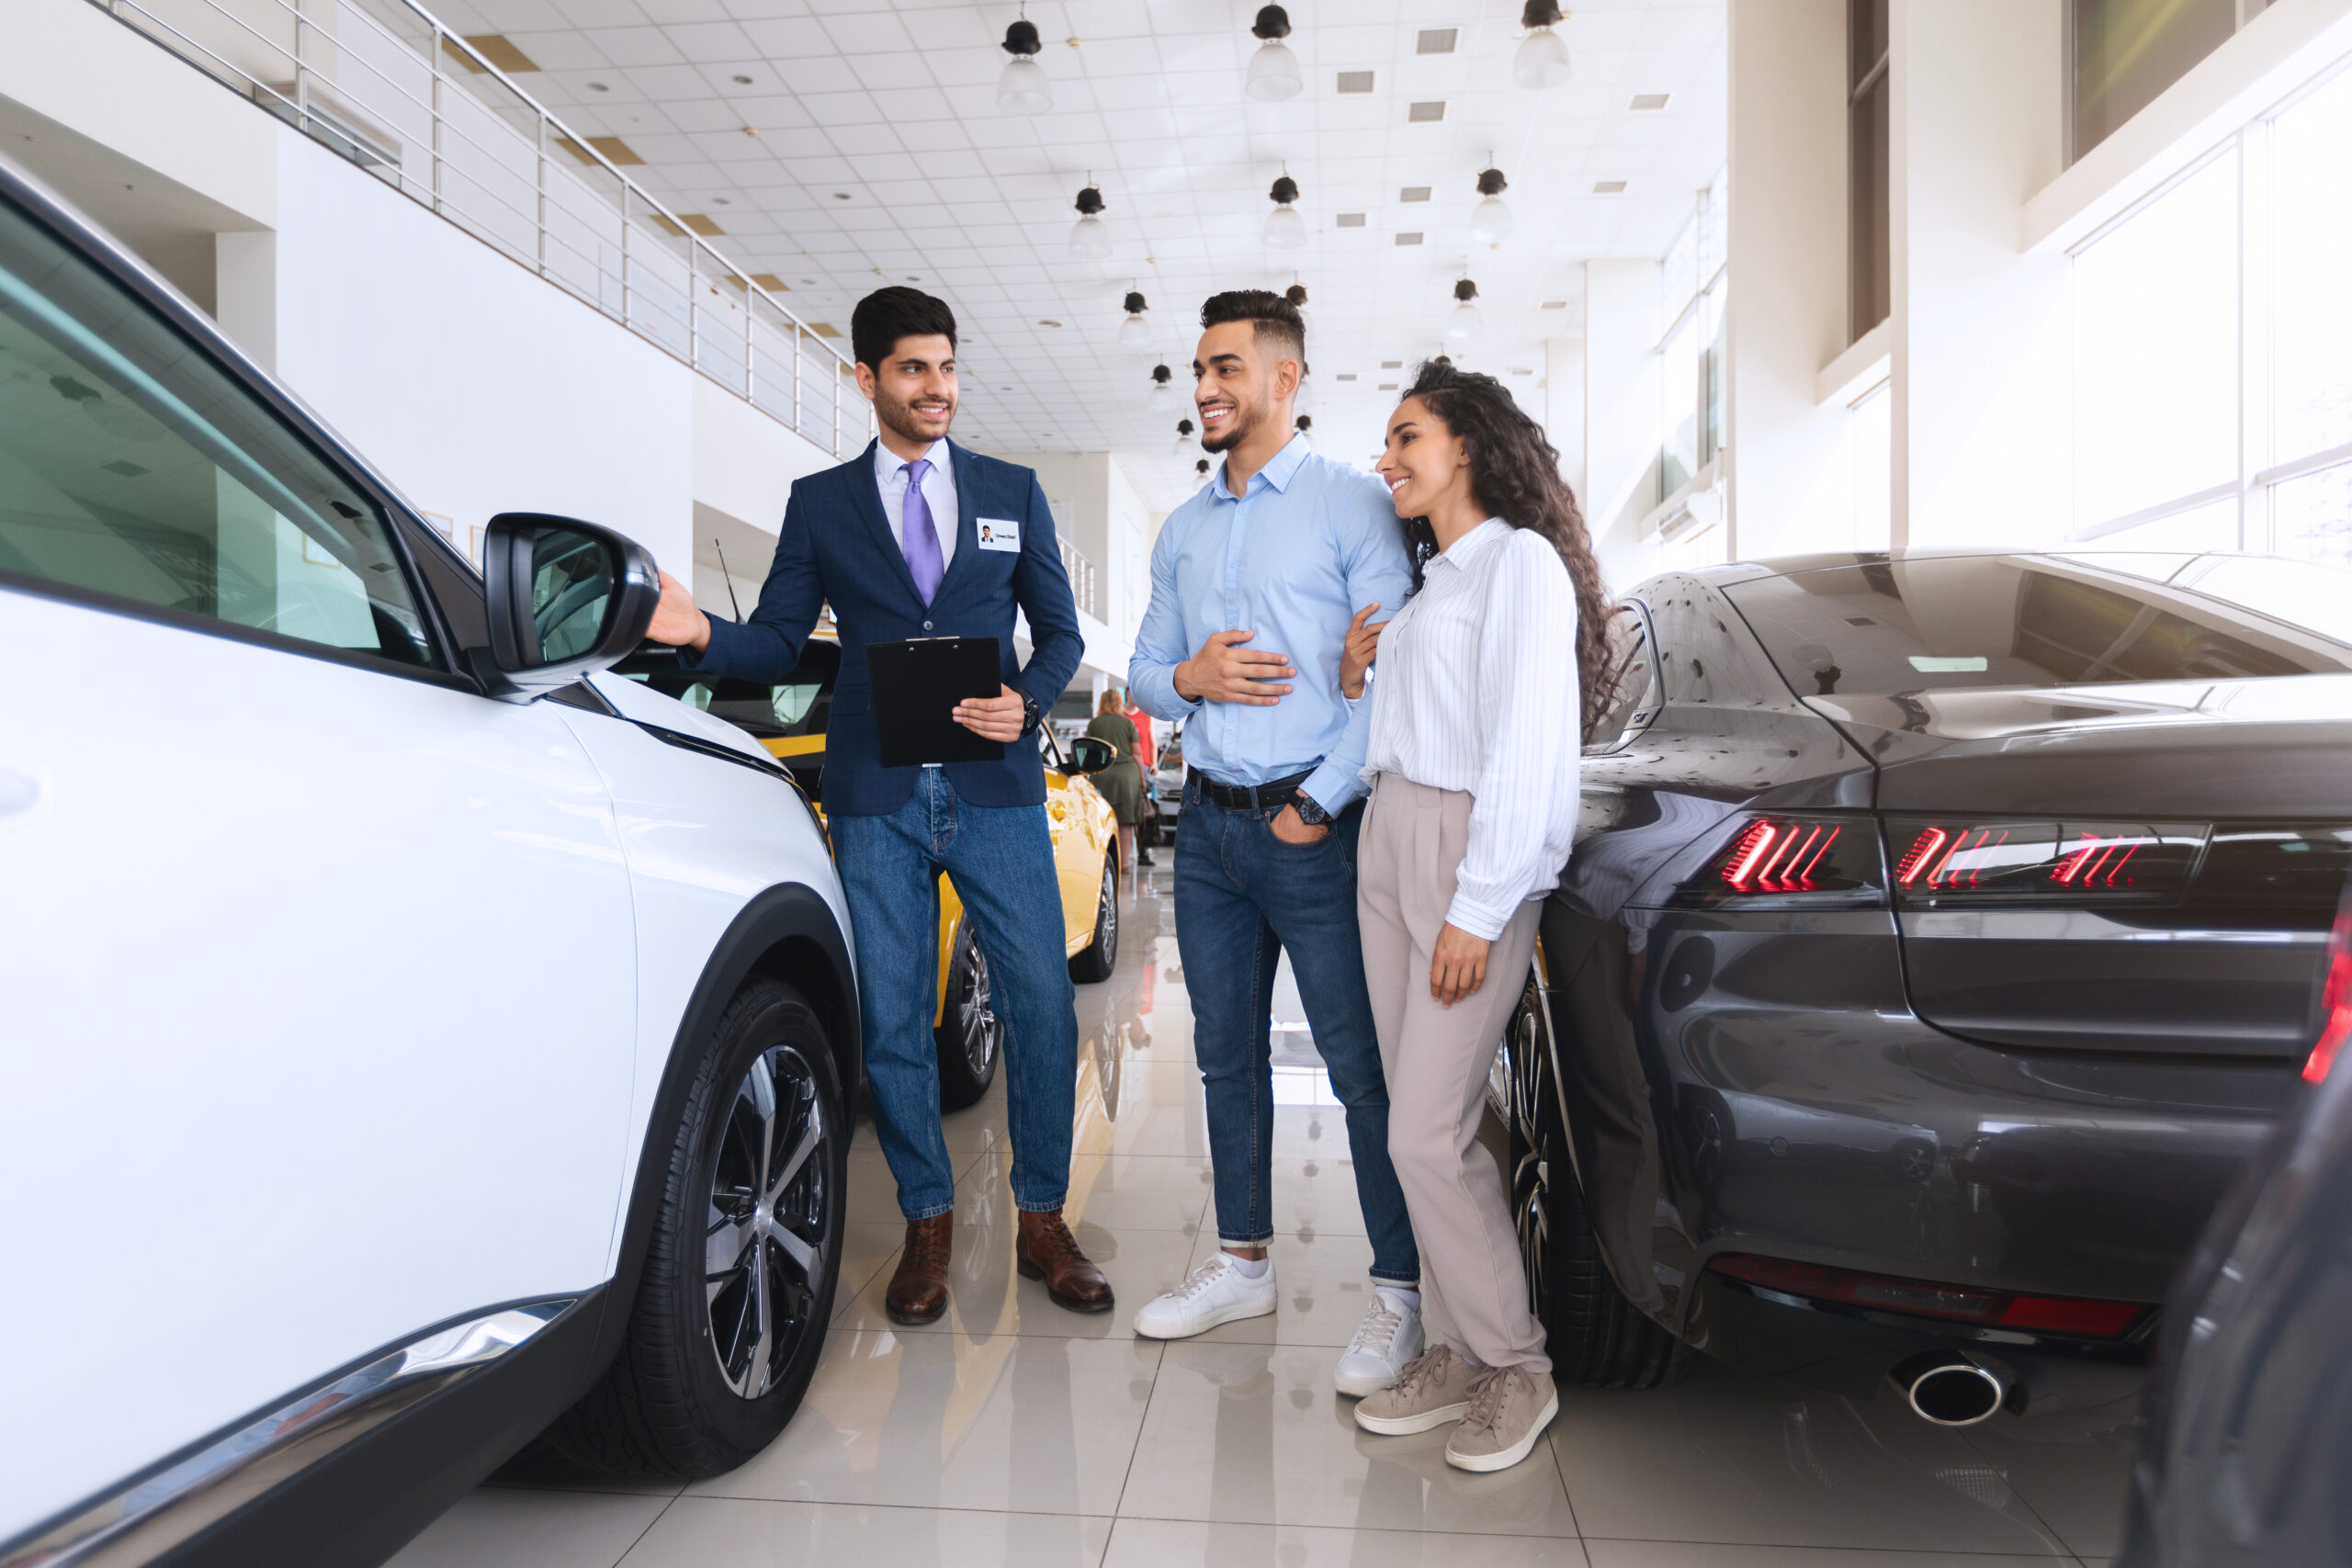 Three people stood in a car showroom between two cars. One person is a salesman, the other two are customers.